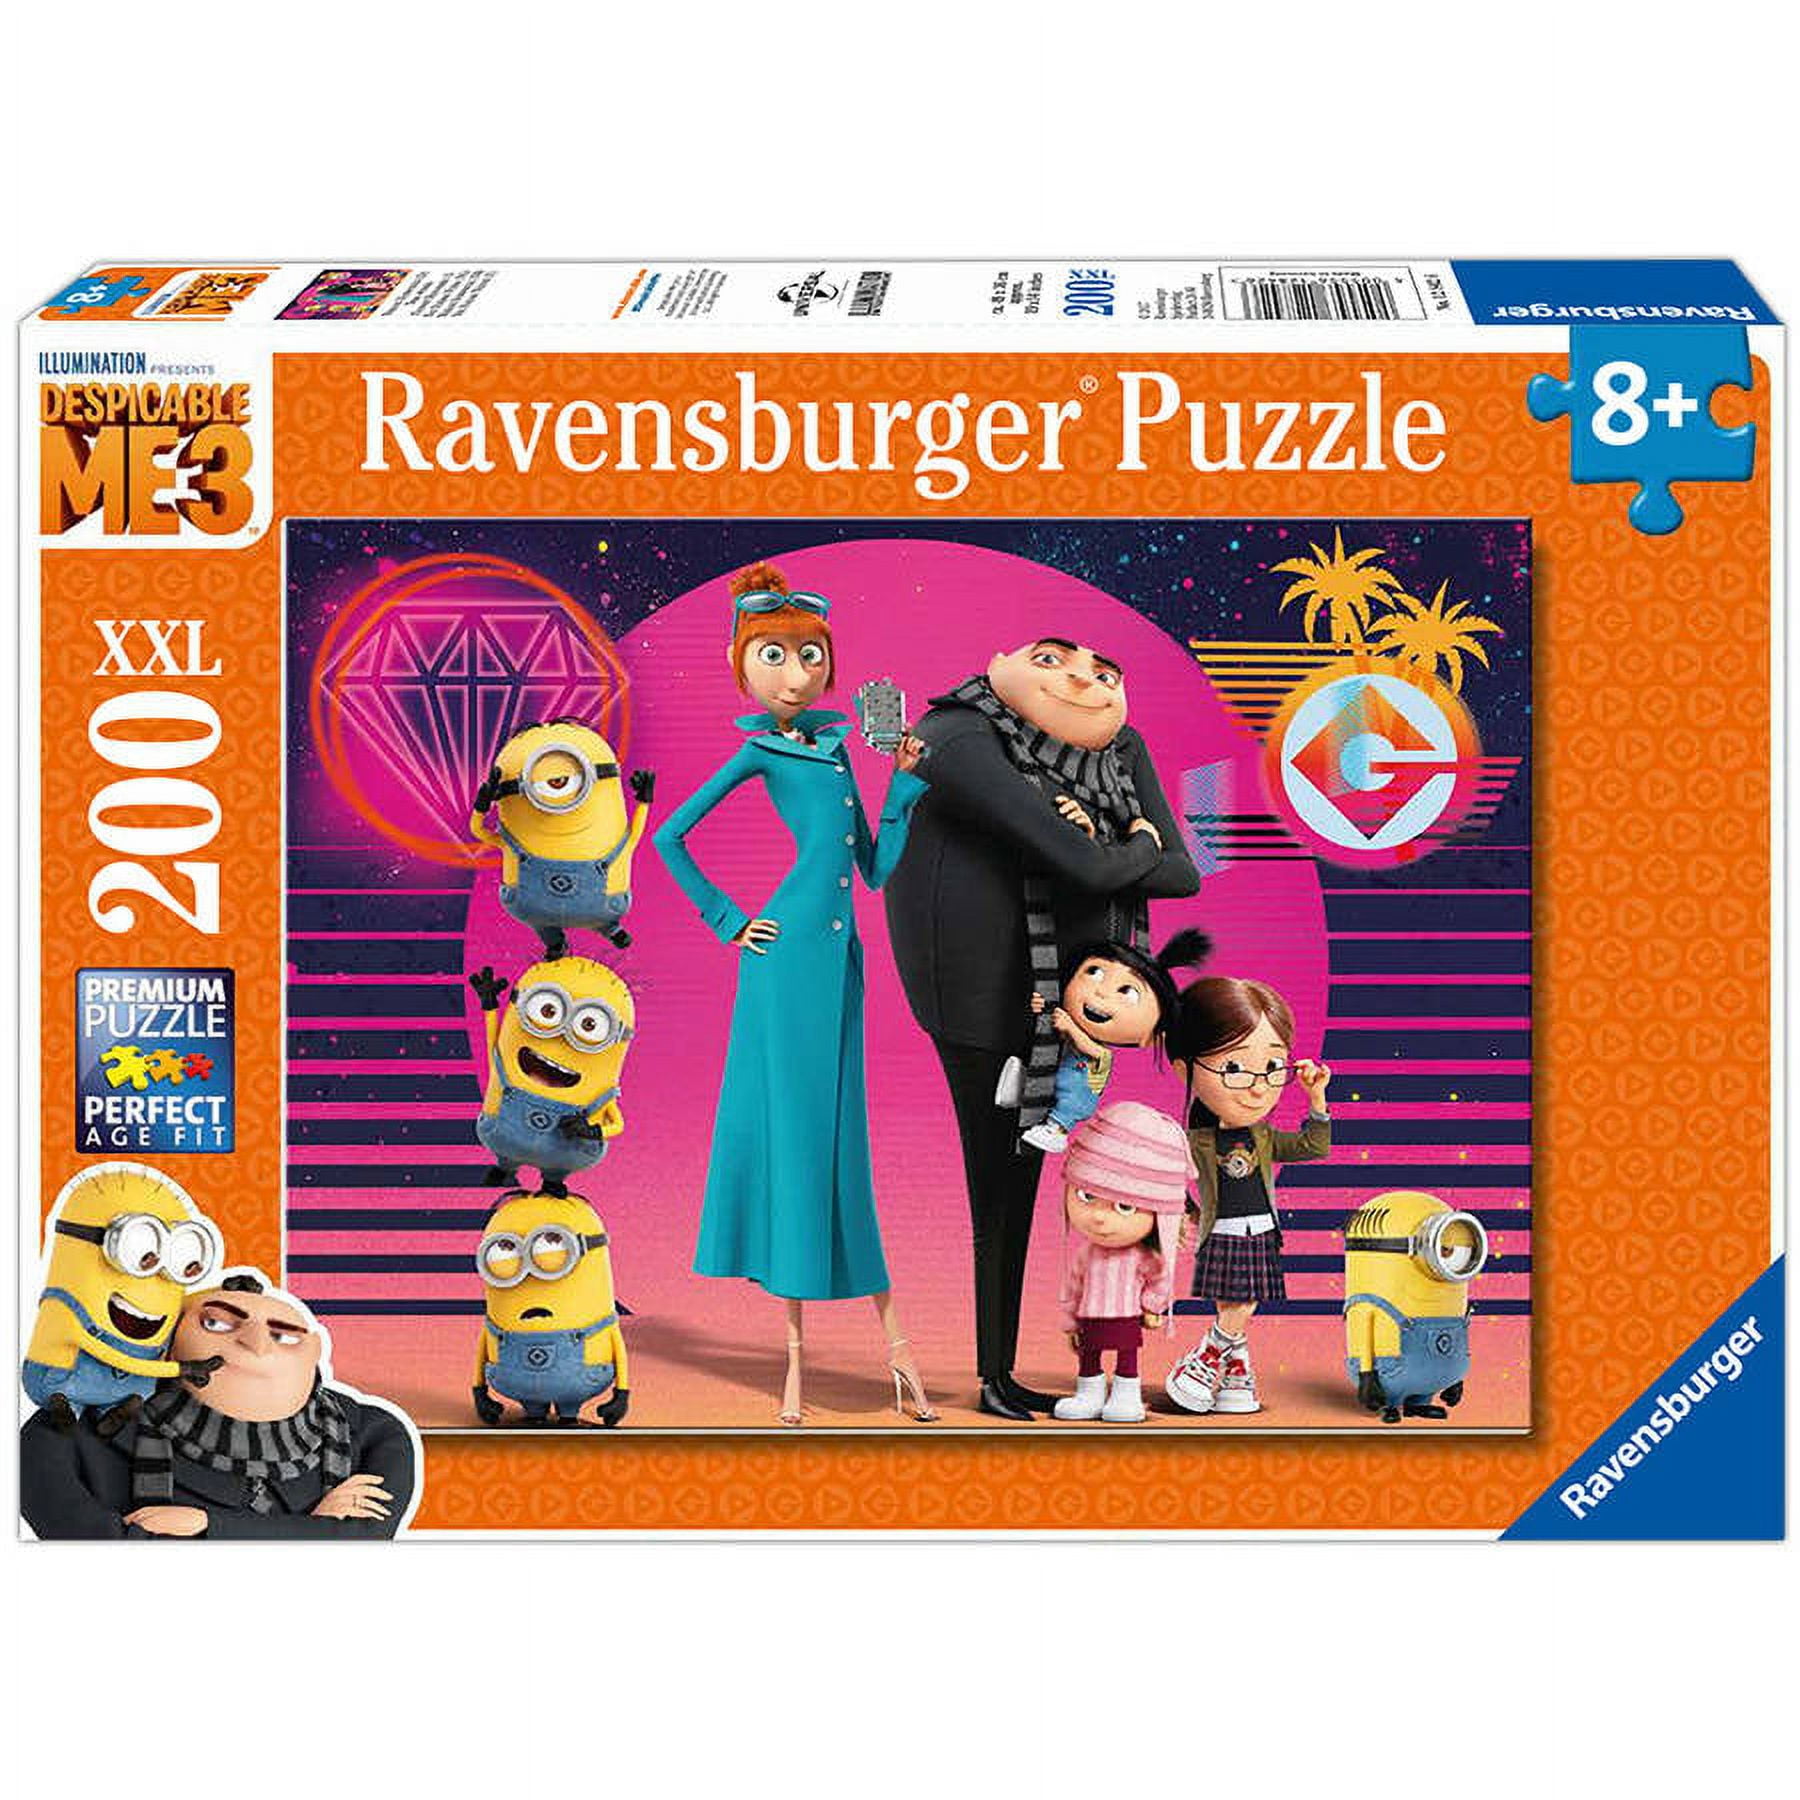 Ravensburger Come Play With Me Preschool Game Near Complete No